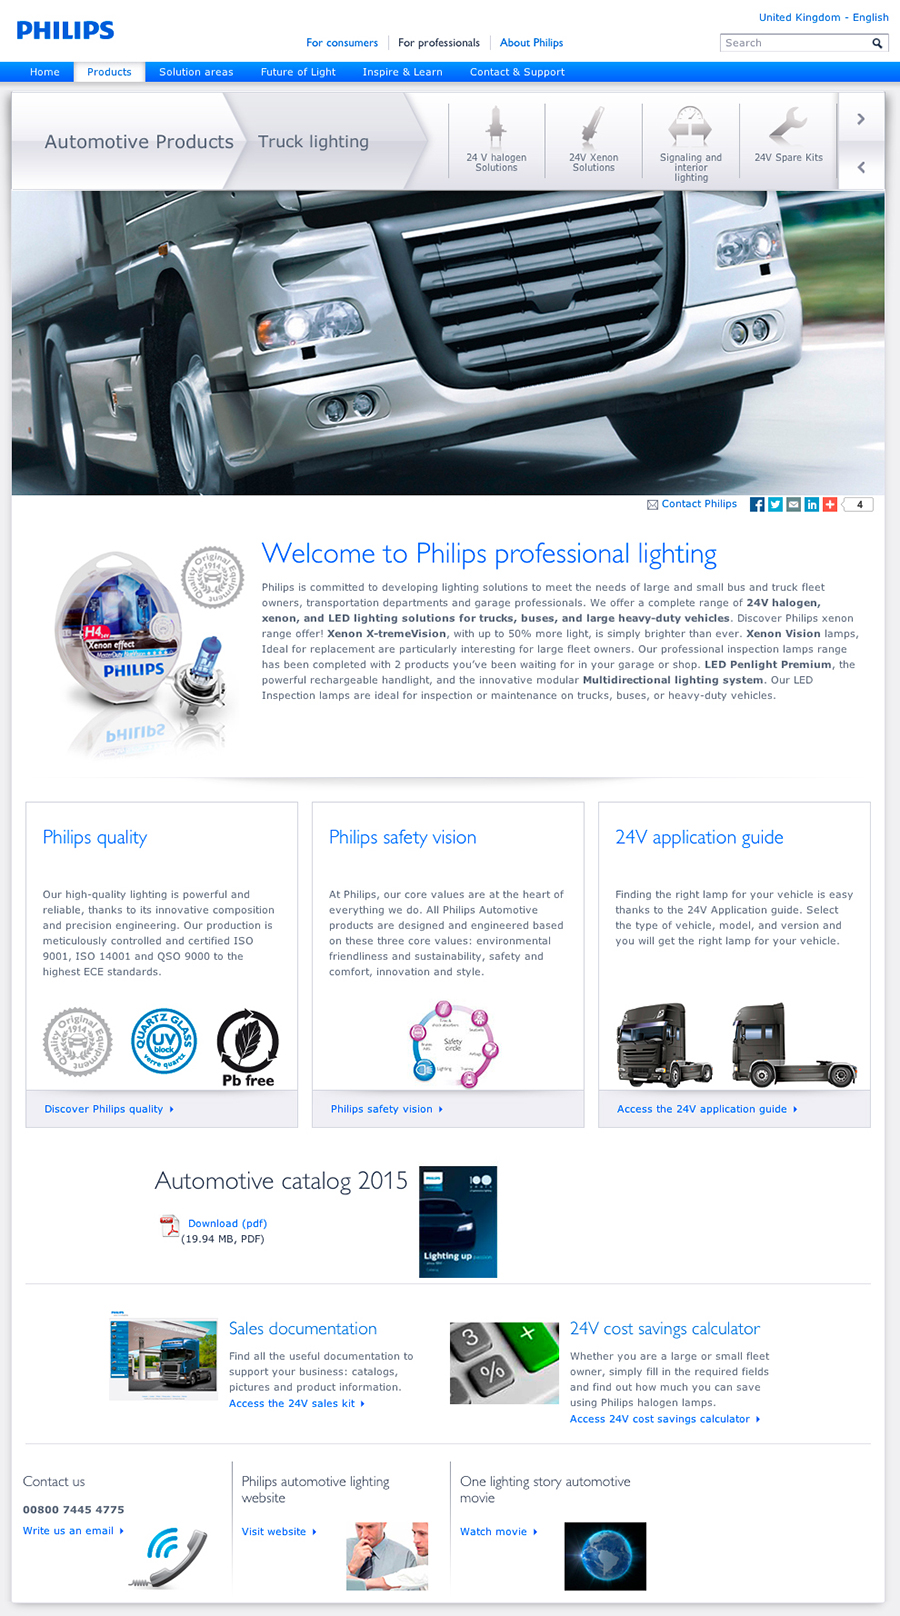 Philips automotive professional website - home page